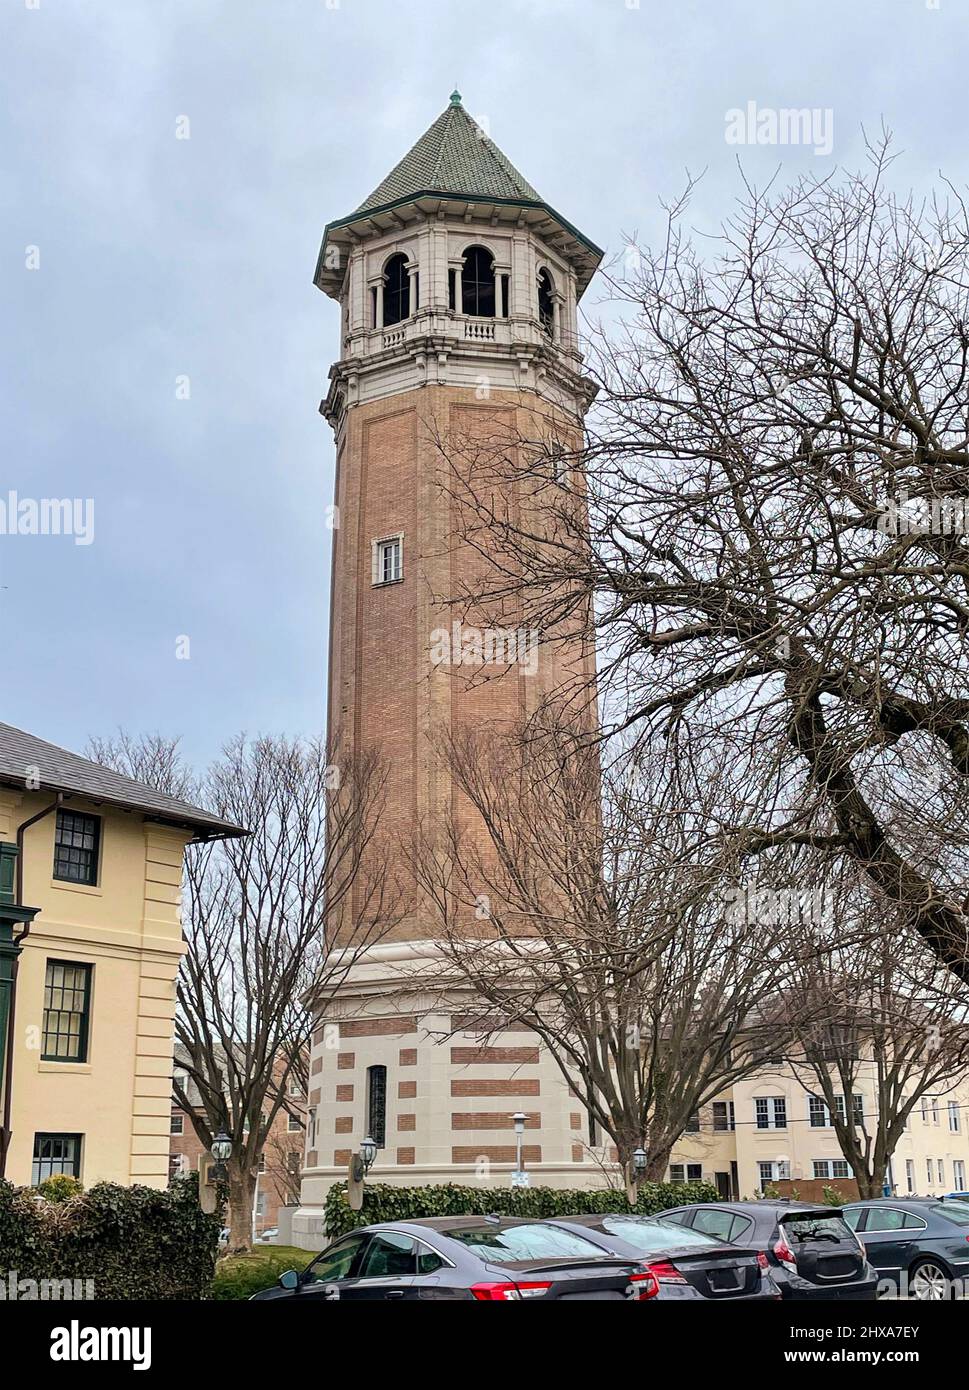 The historic Roland Water Tower in Baltimore City, built between 1904 and 1905, in the striking Beaux Arts style of architecture, has been recently st Stock Photo